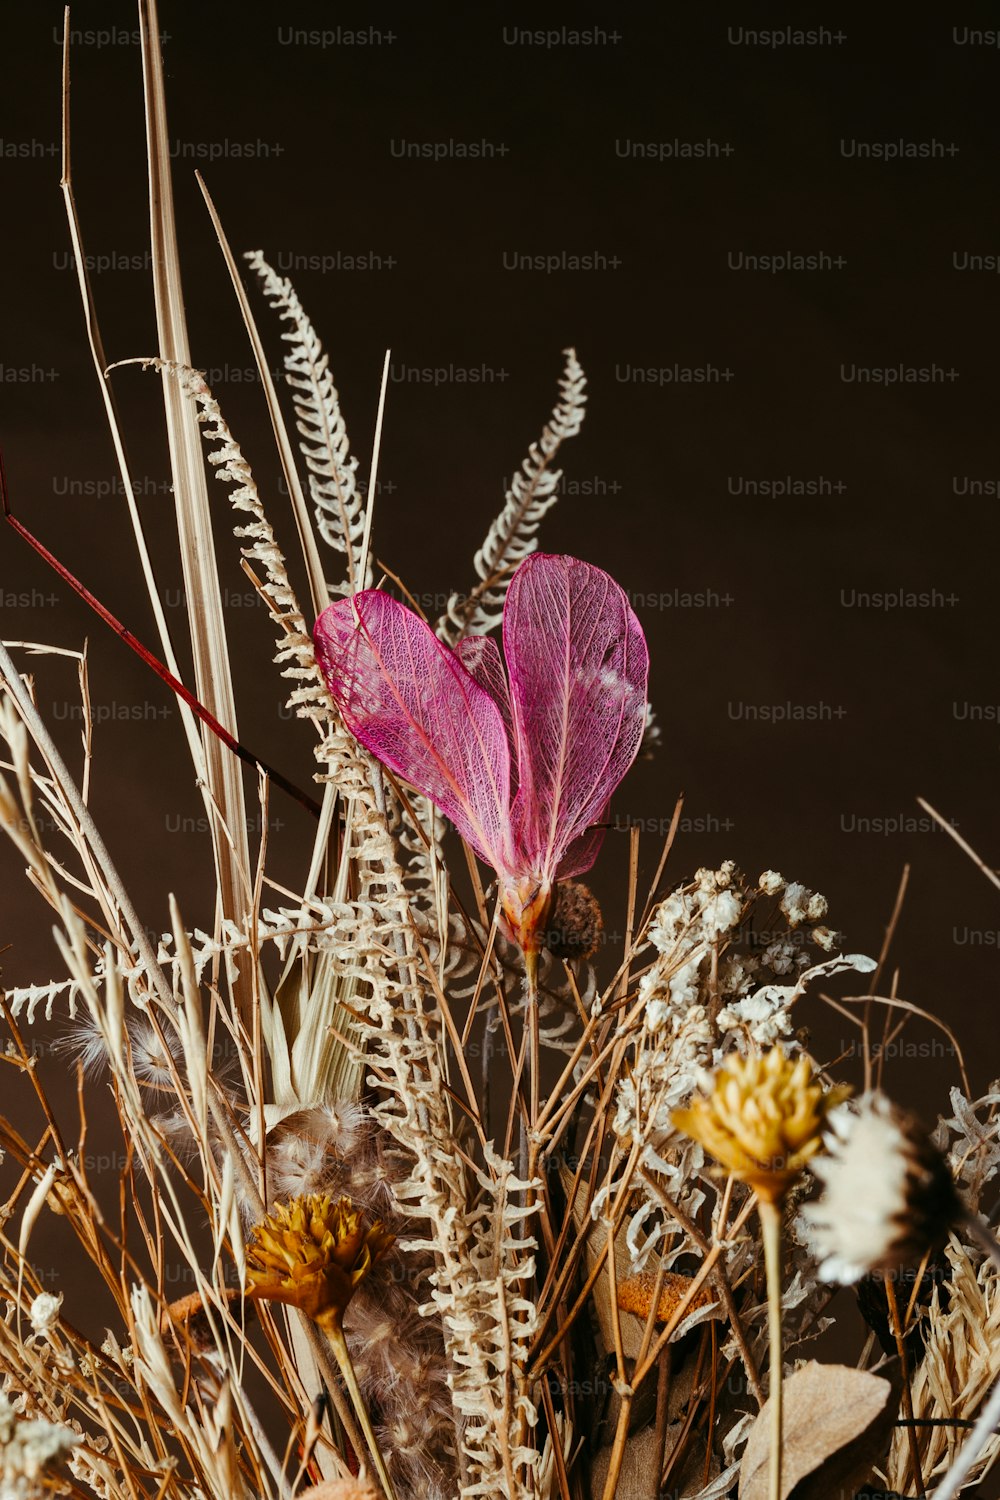 Dried Wildflowers On Light Background Stock Photo, Picture and Royalty Free  Image. Image 99174794.